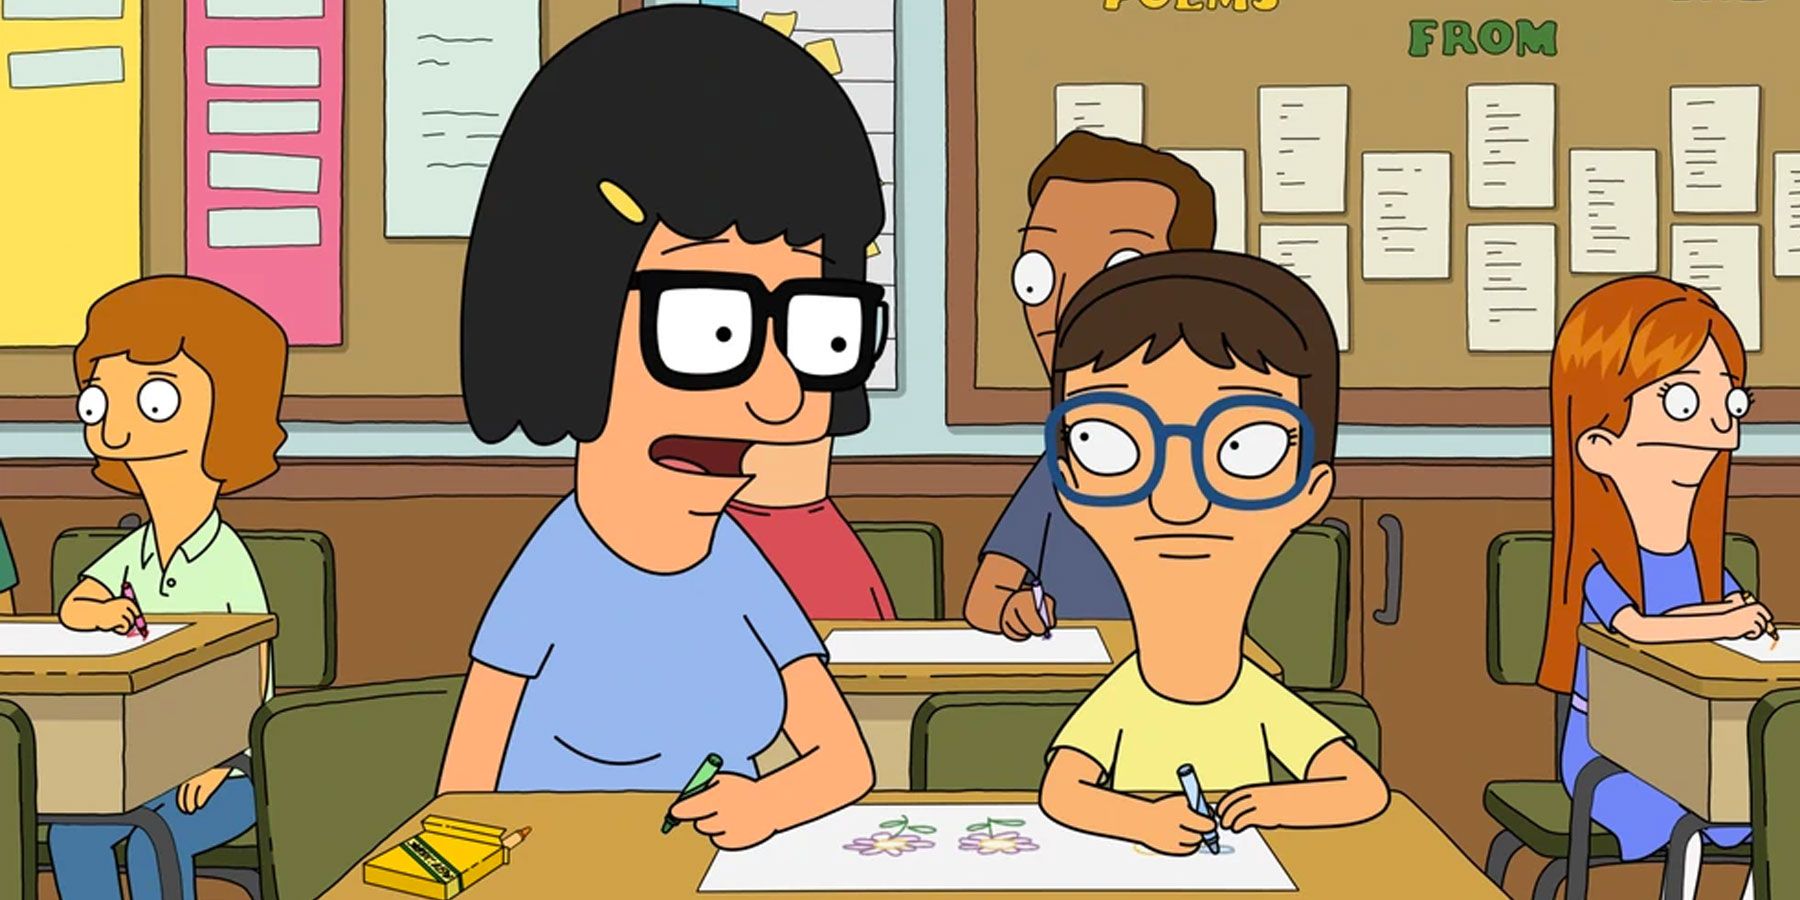 Tina talking to her Little Fish in Bob's Burgers